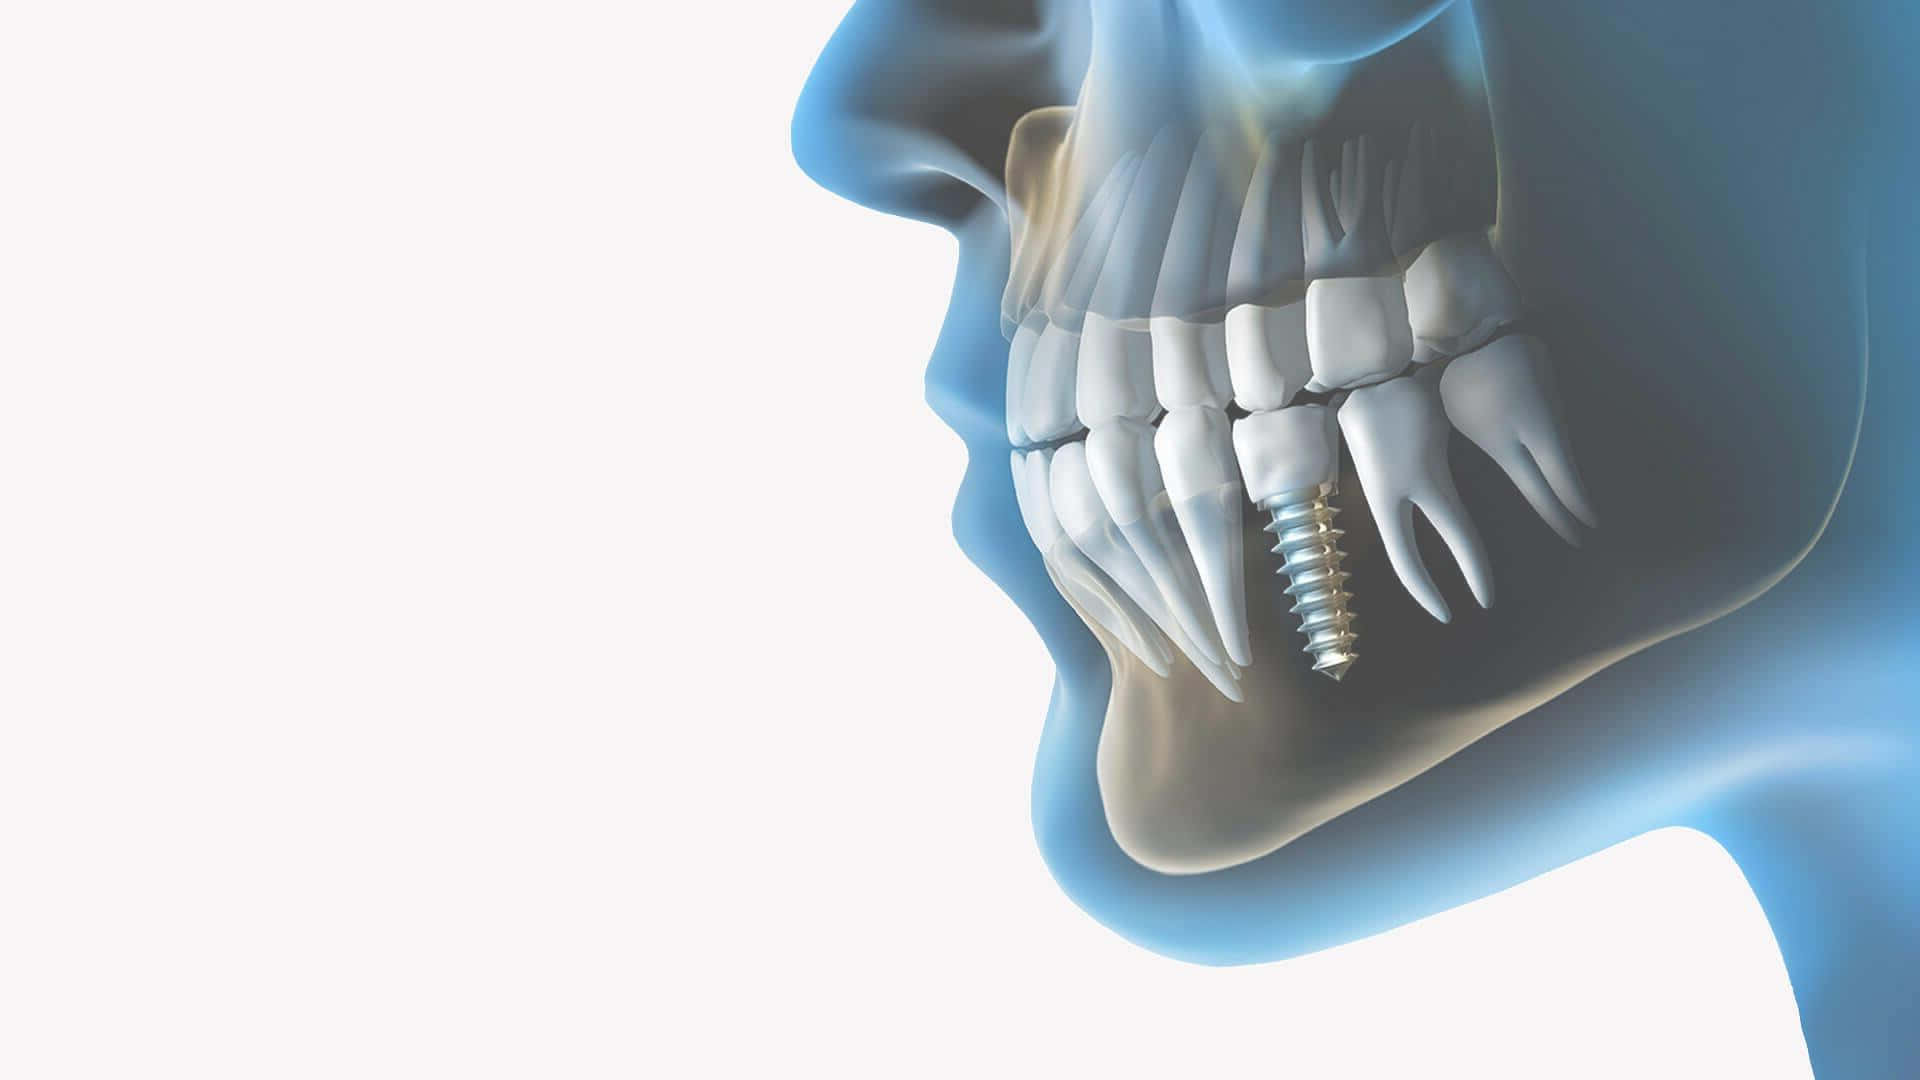 A Person's Mouth With Dental Implants In It